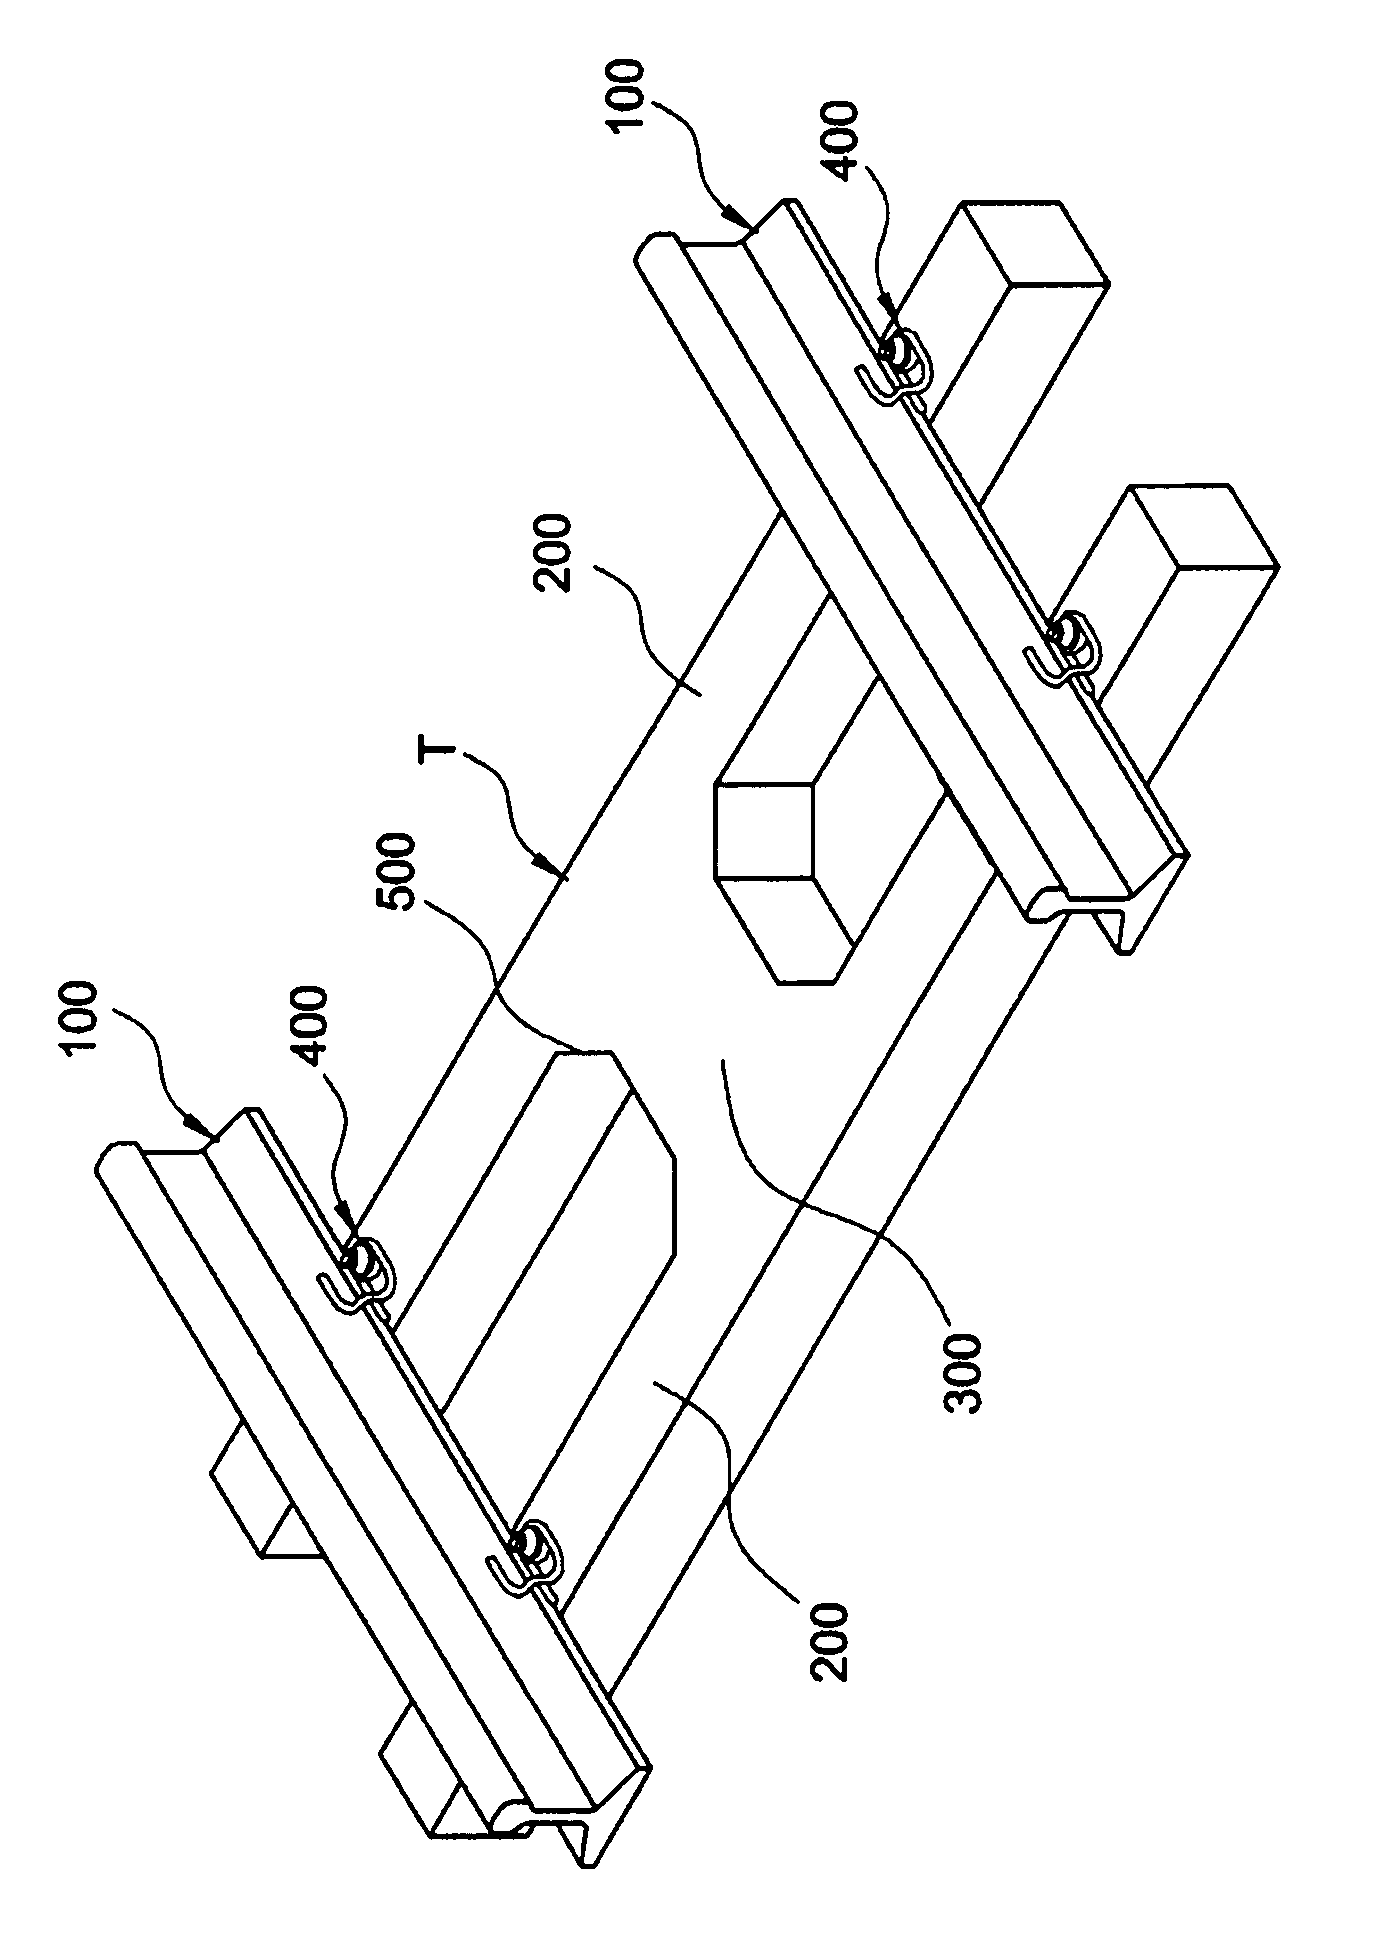 H-shaped railroad tie, and mold for manufacturing same